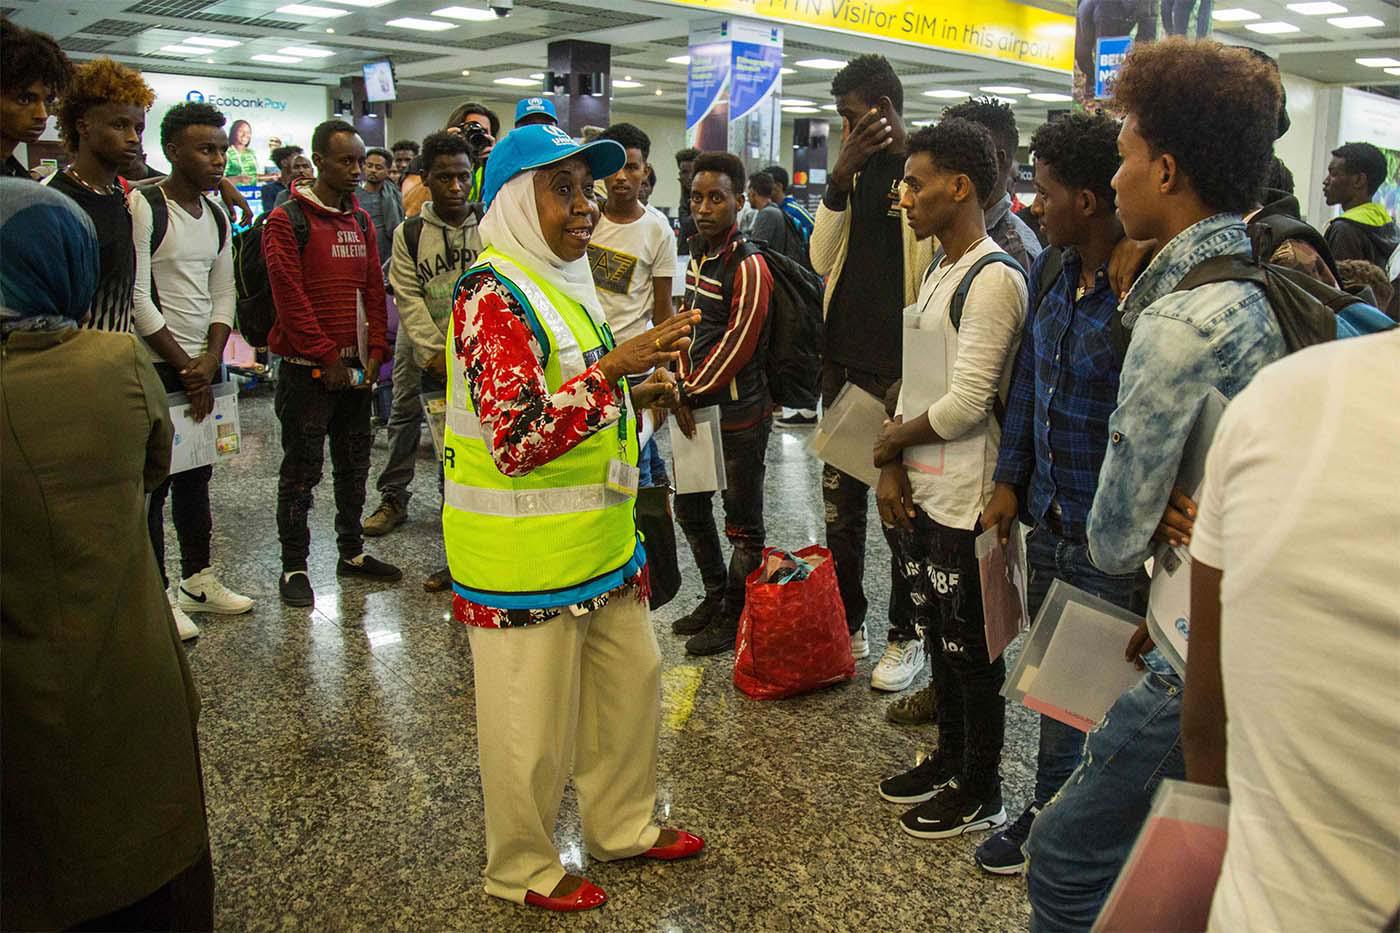 Rwanda's UNHCR welcoming the first arrival of 66 refugees and asylum seekers from Libya at the Kigali international airport